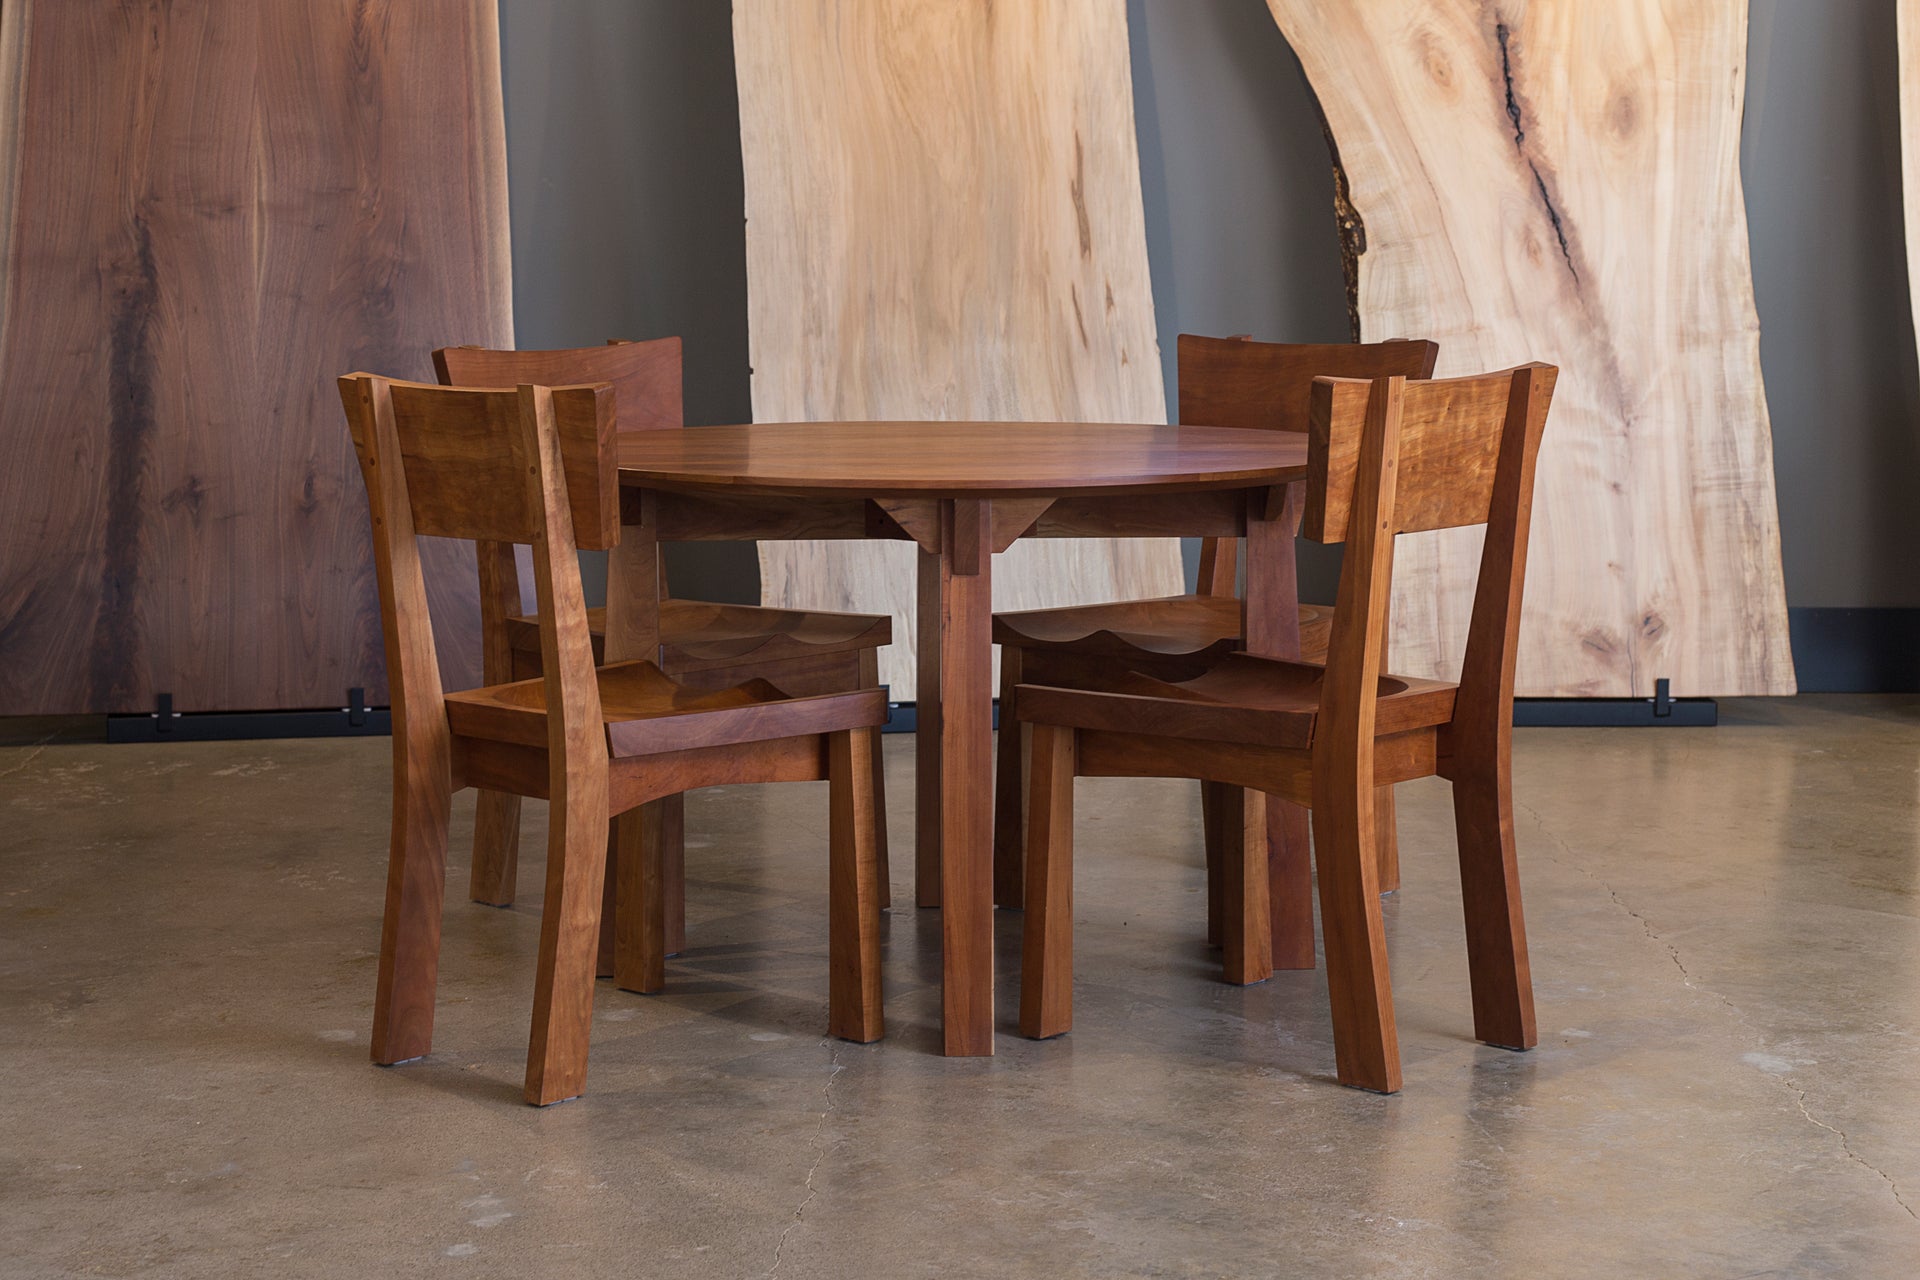 Wooden table and dining chairs, crafted by TY Fine Furniture